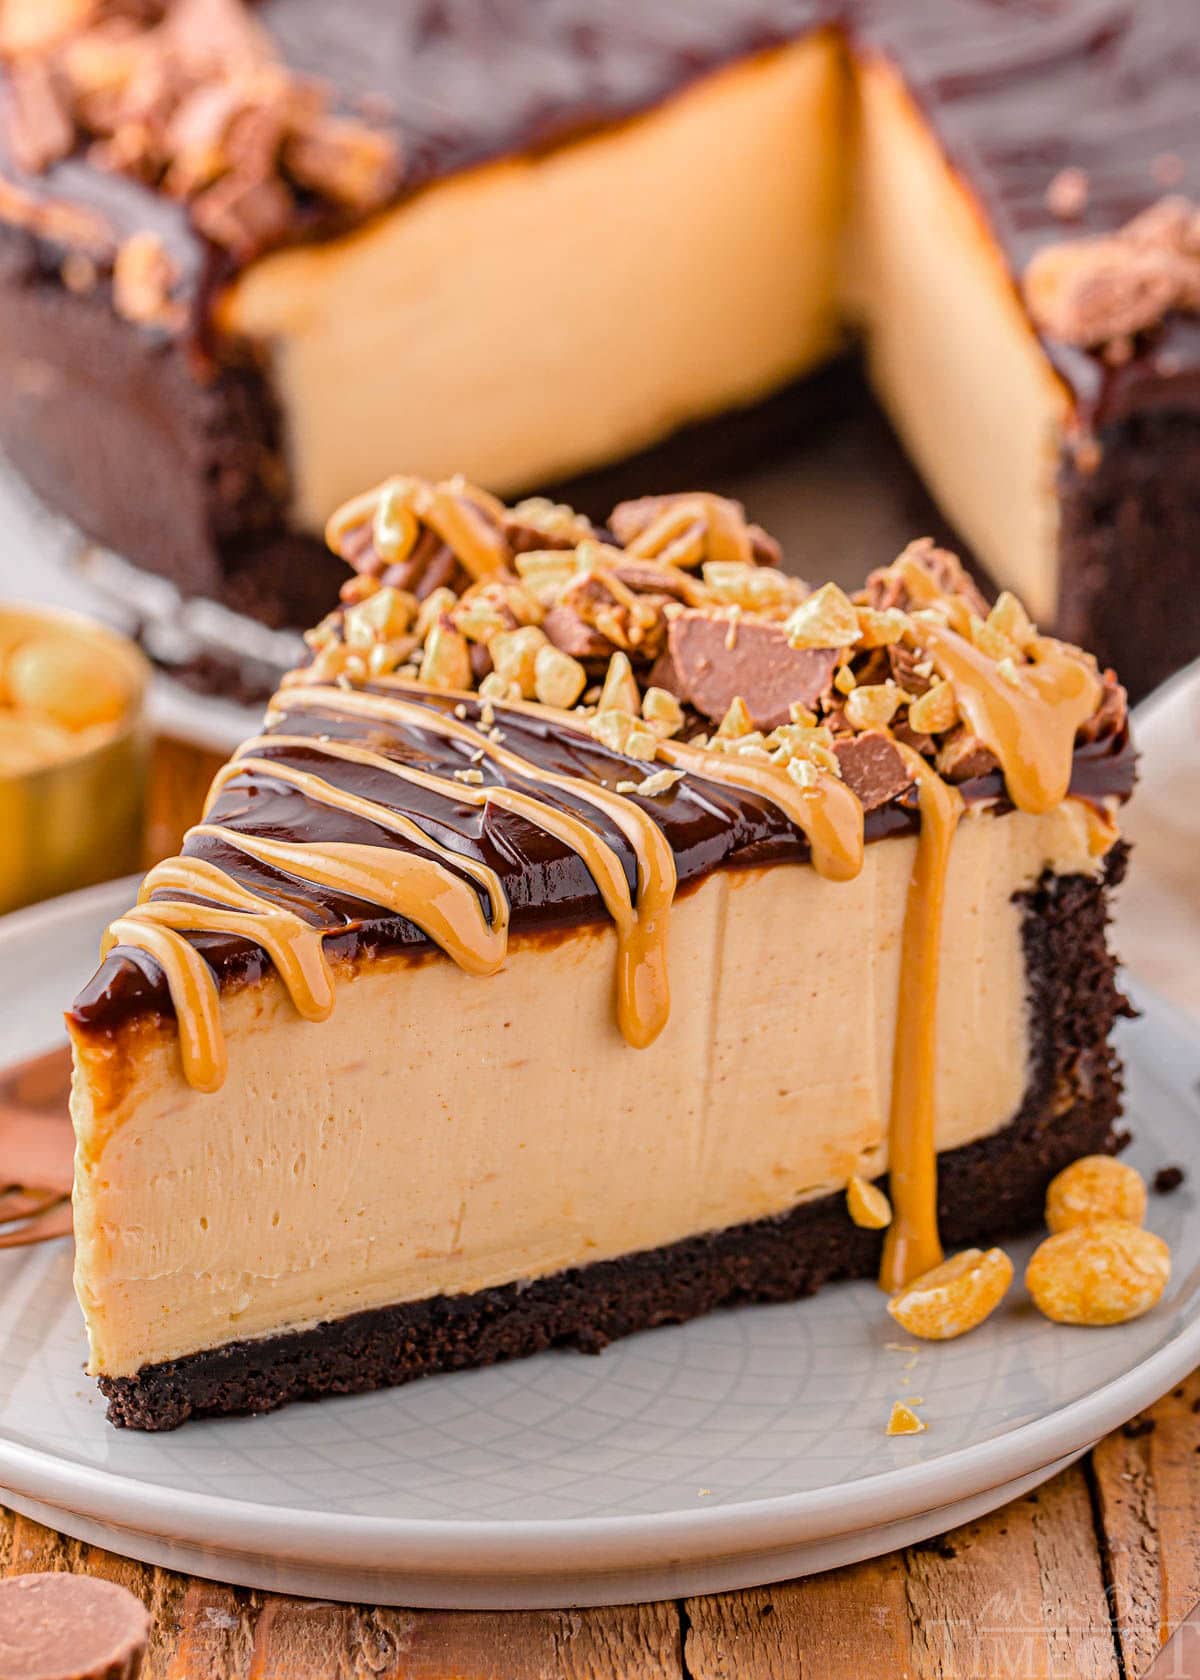 single slice of peanut butter cheesecake sitting on small round white plate. cheesecake is topped with peanut butter topping and reese's peanut butter cups chopped up.